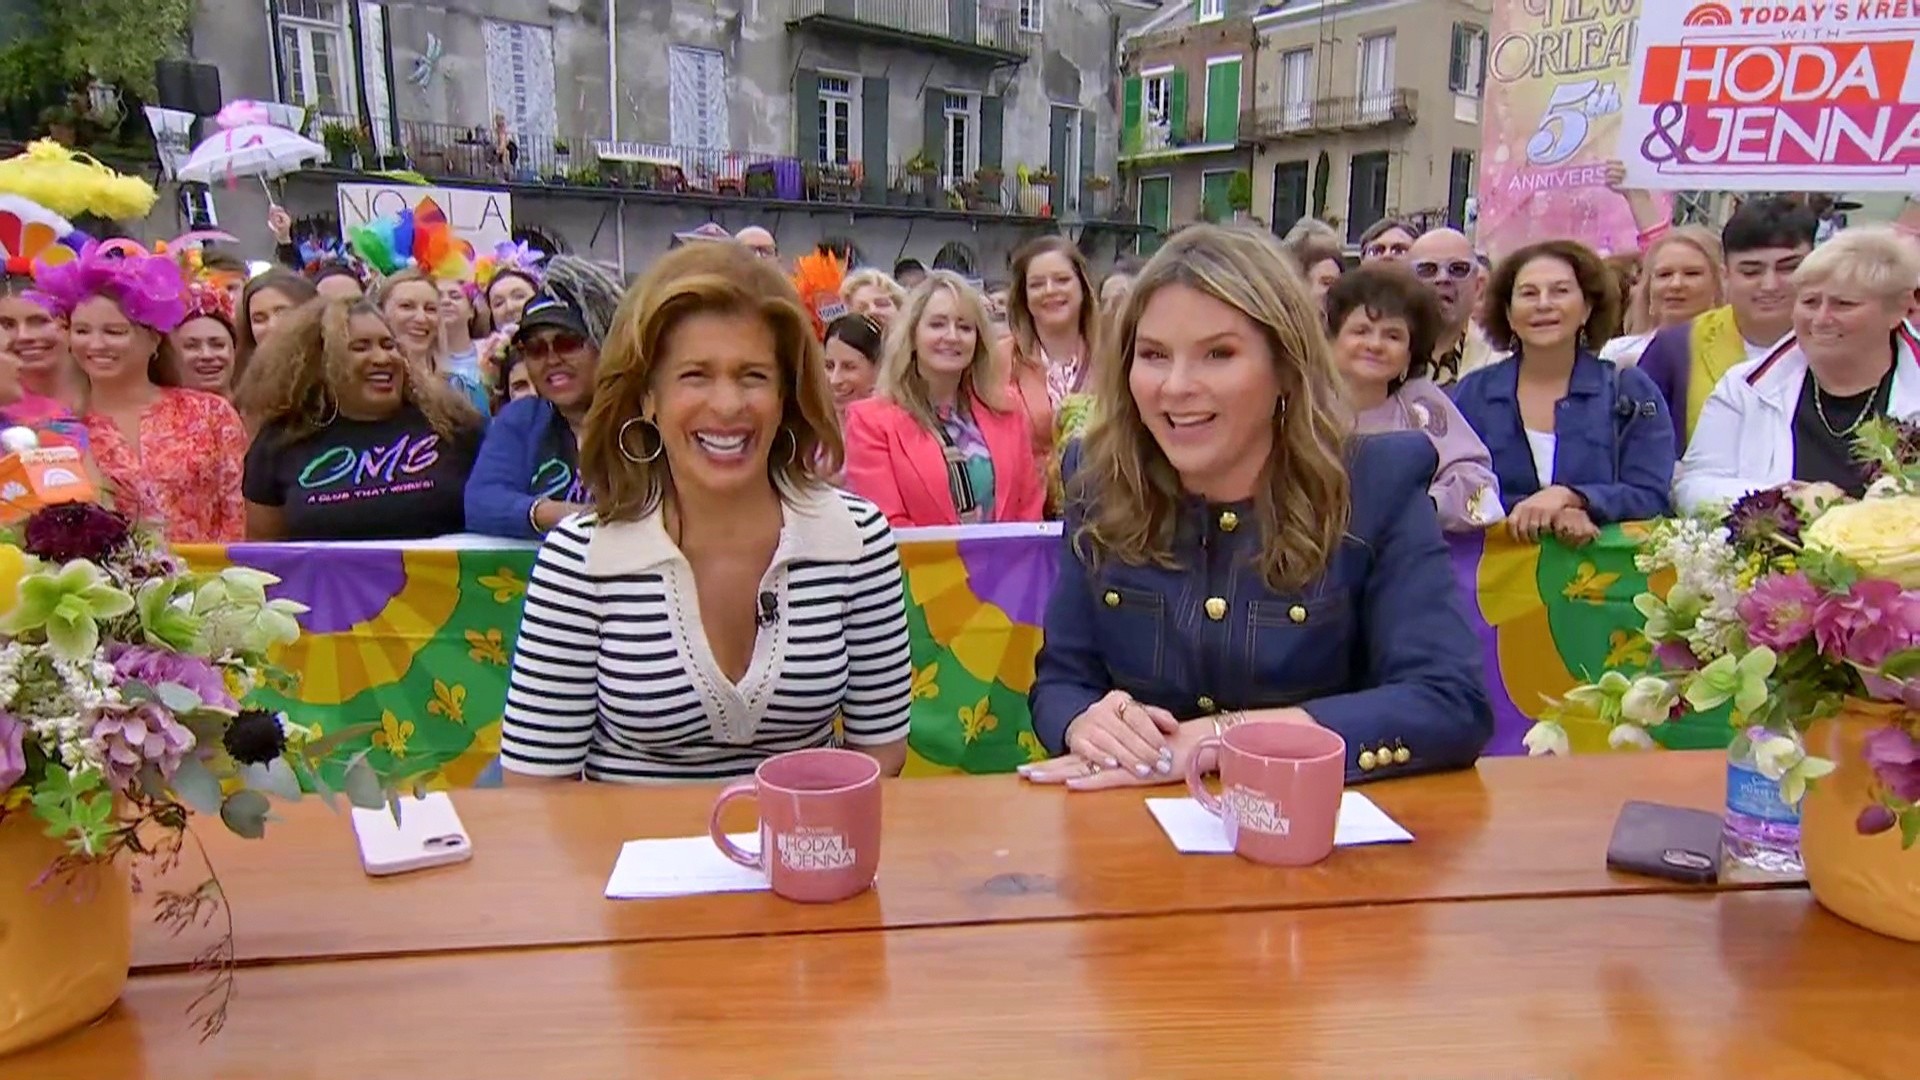 Hoda & Jenna celebrate 5 years with live show from New Orleans